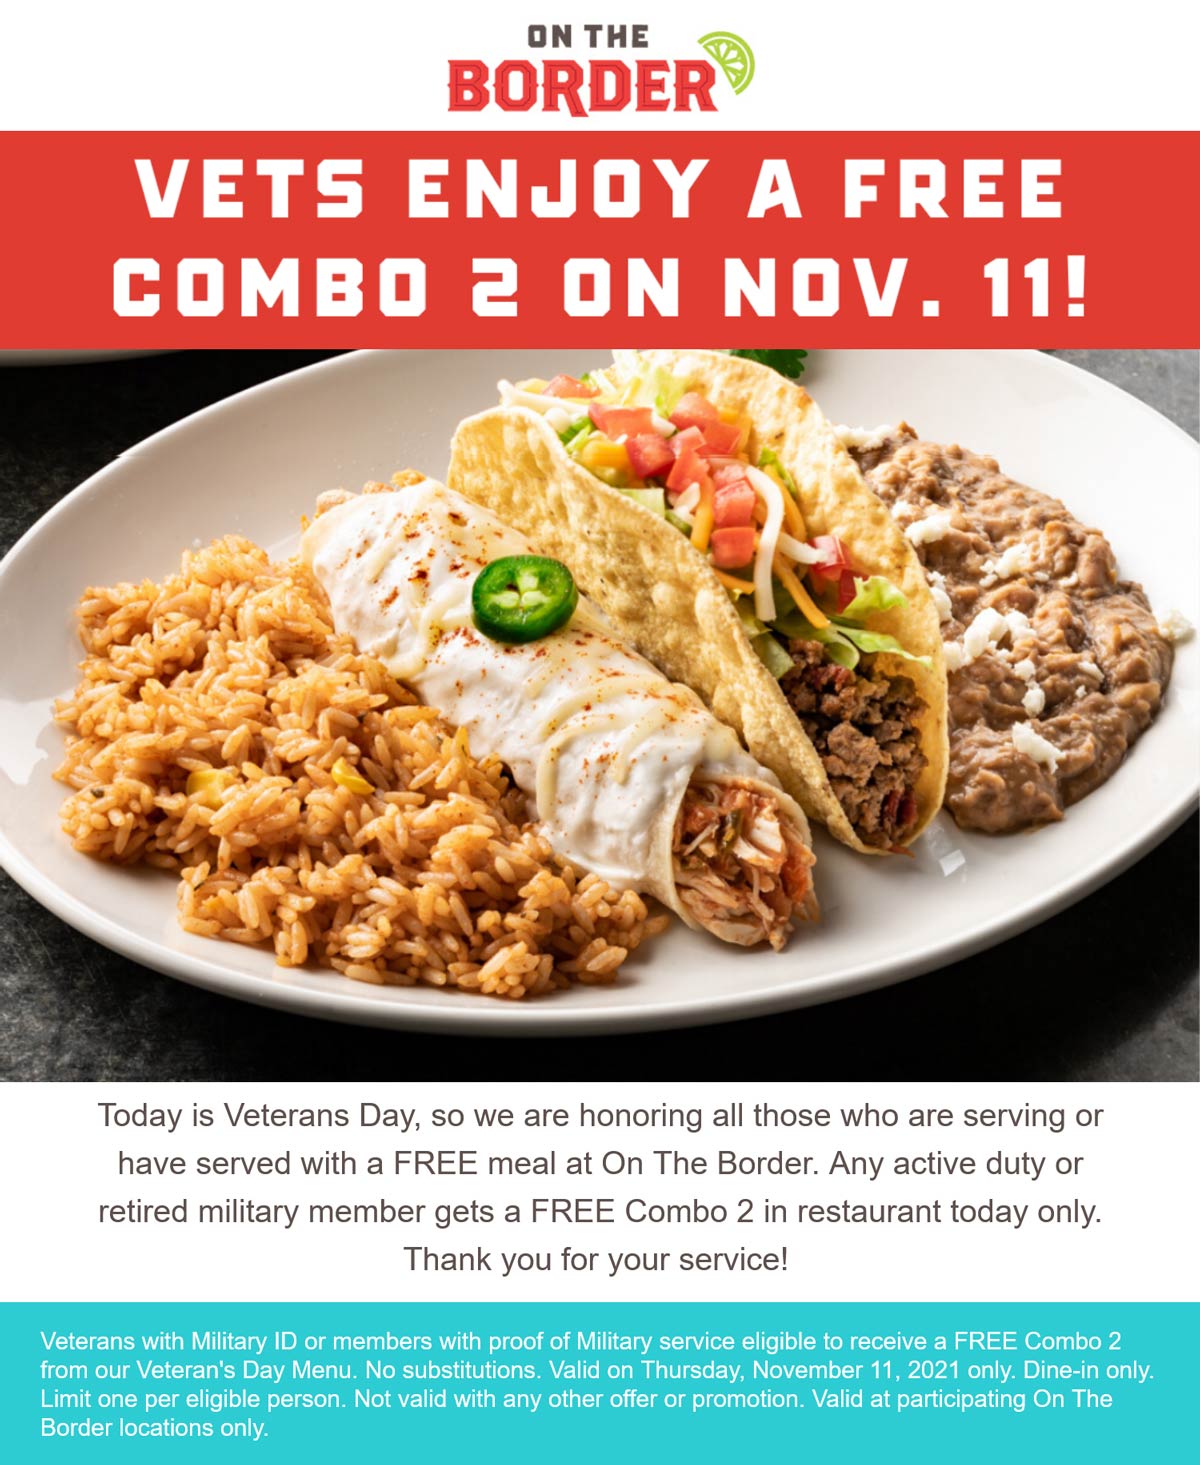 On The Border restaurants Coupon  Veterans are served a free meal today at On The Border #ontheborder 